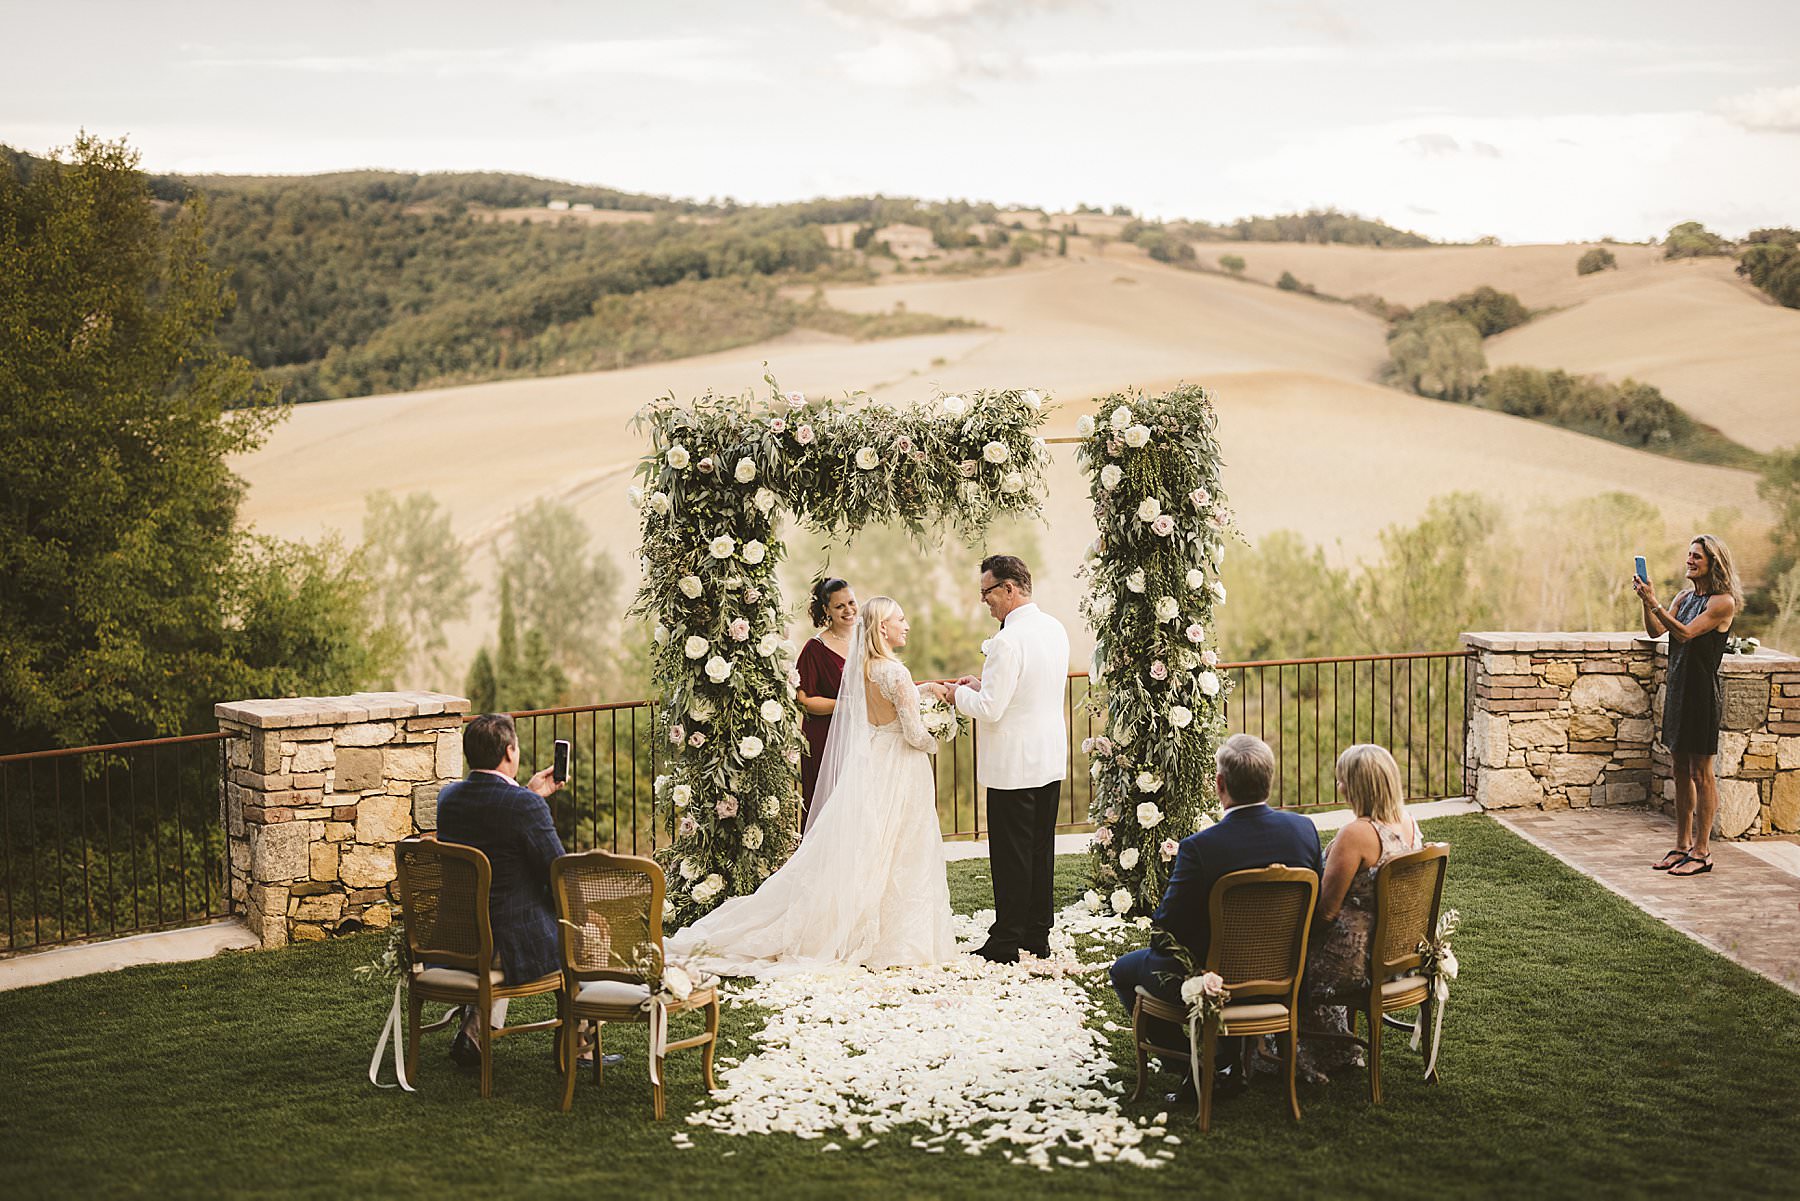 Very private elopement ceremony with breathtaking view of countryside of Tuscany at Borgo Pignano